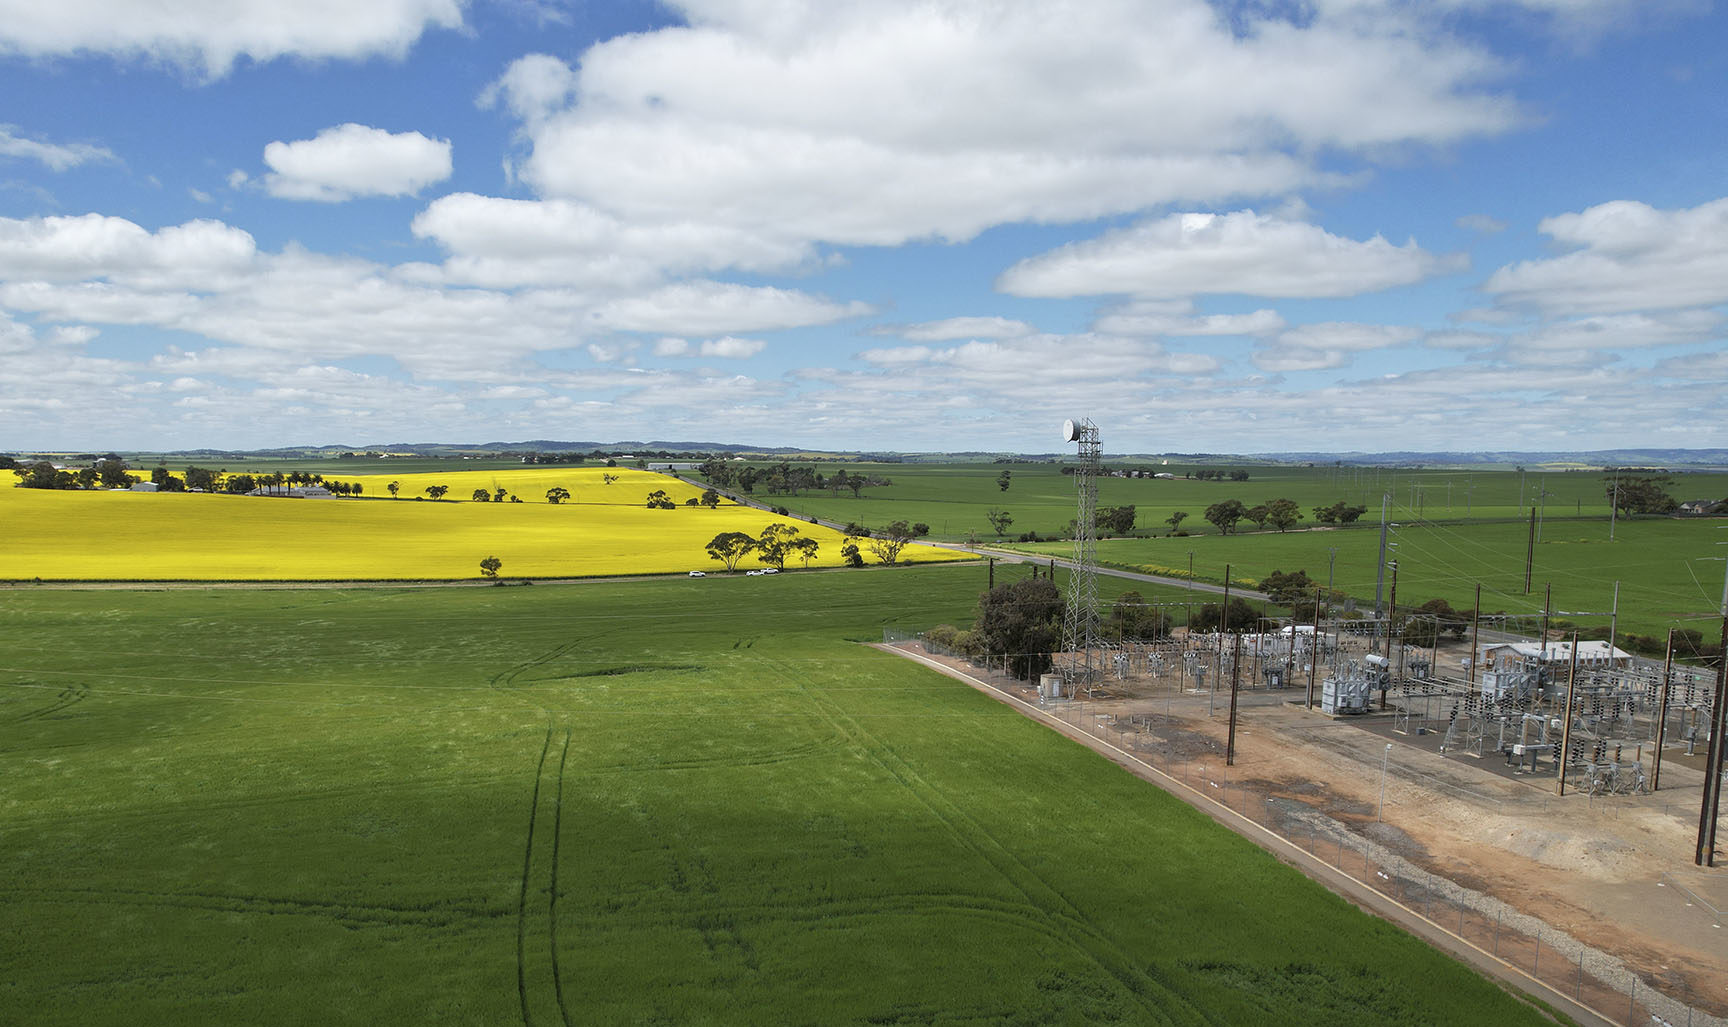 An image of Templers Battery Storage Project in South Australia. 